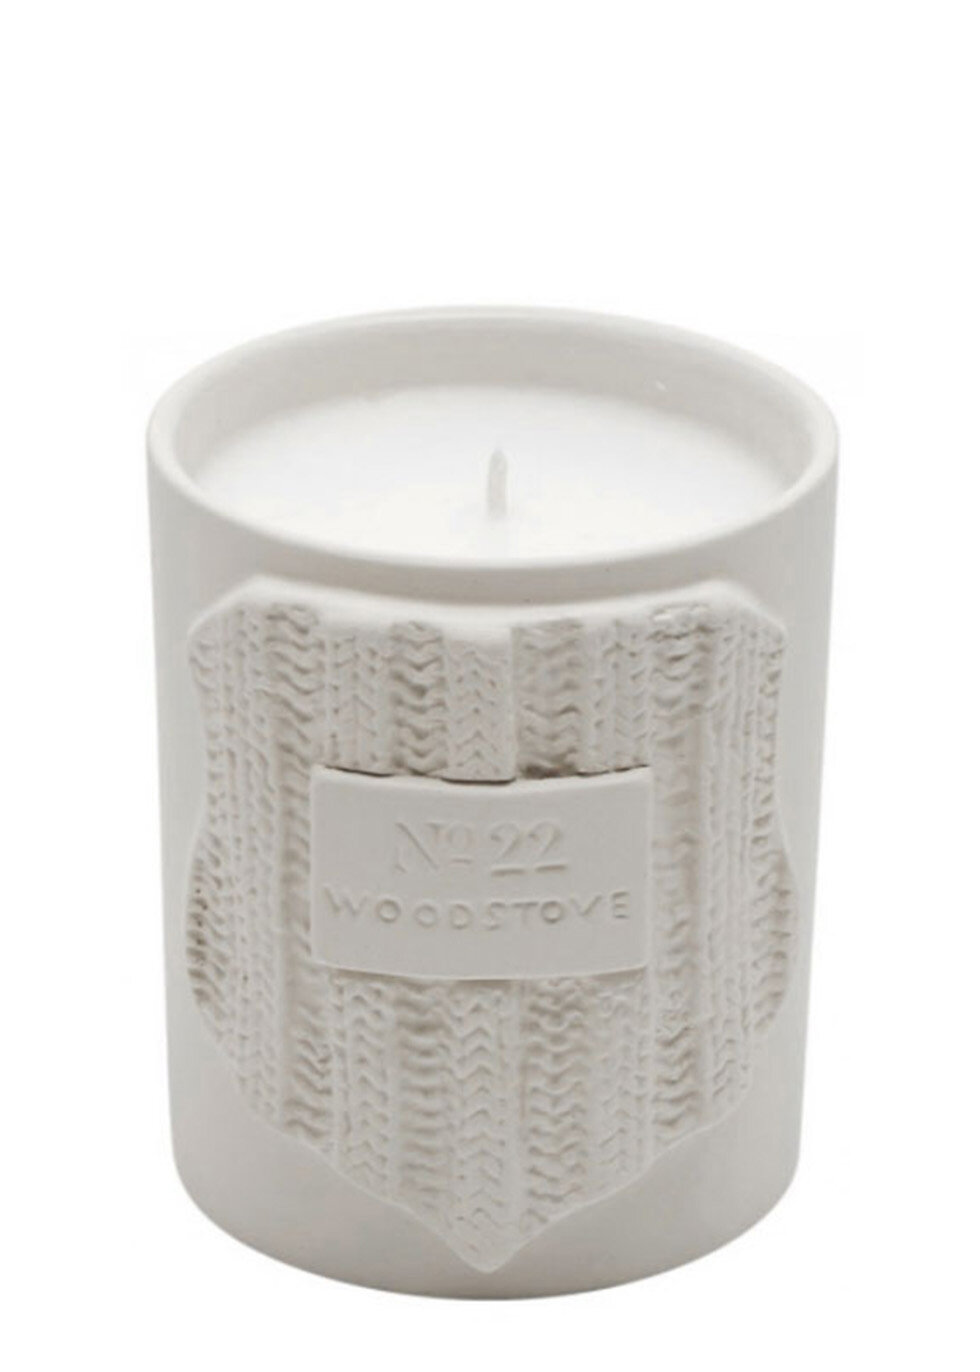 Woodstove scented candle, £40, No.22 at Harvey Nichols